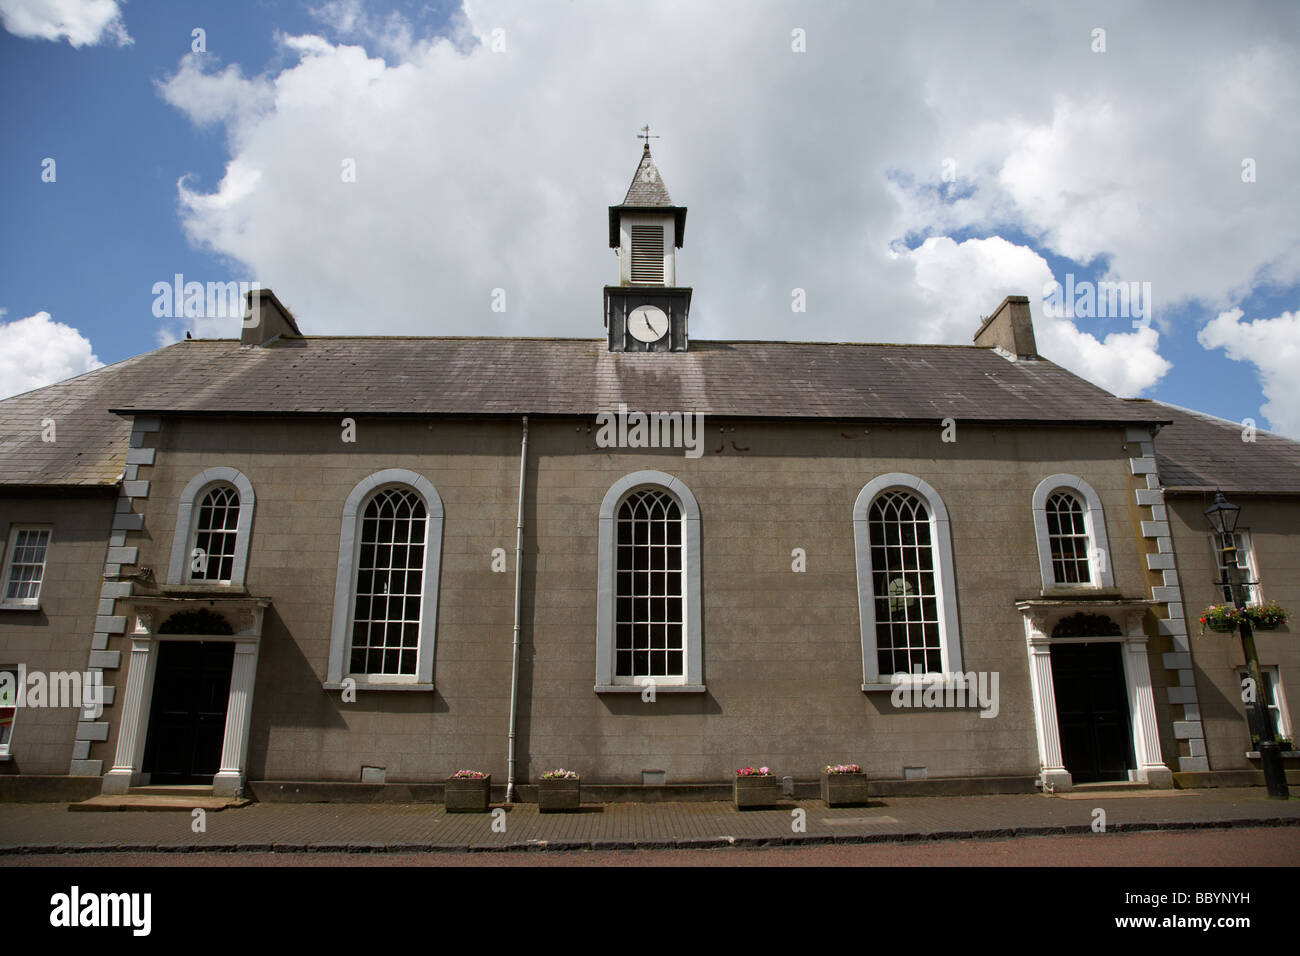 moravian church in 18th century gracehill village a moravian settlement in county antrim northern ireland uk Stock Photo